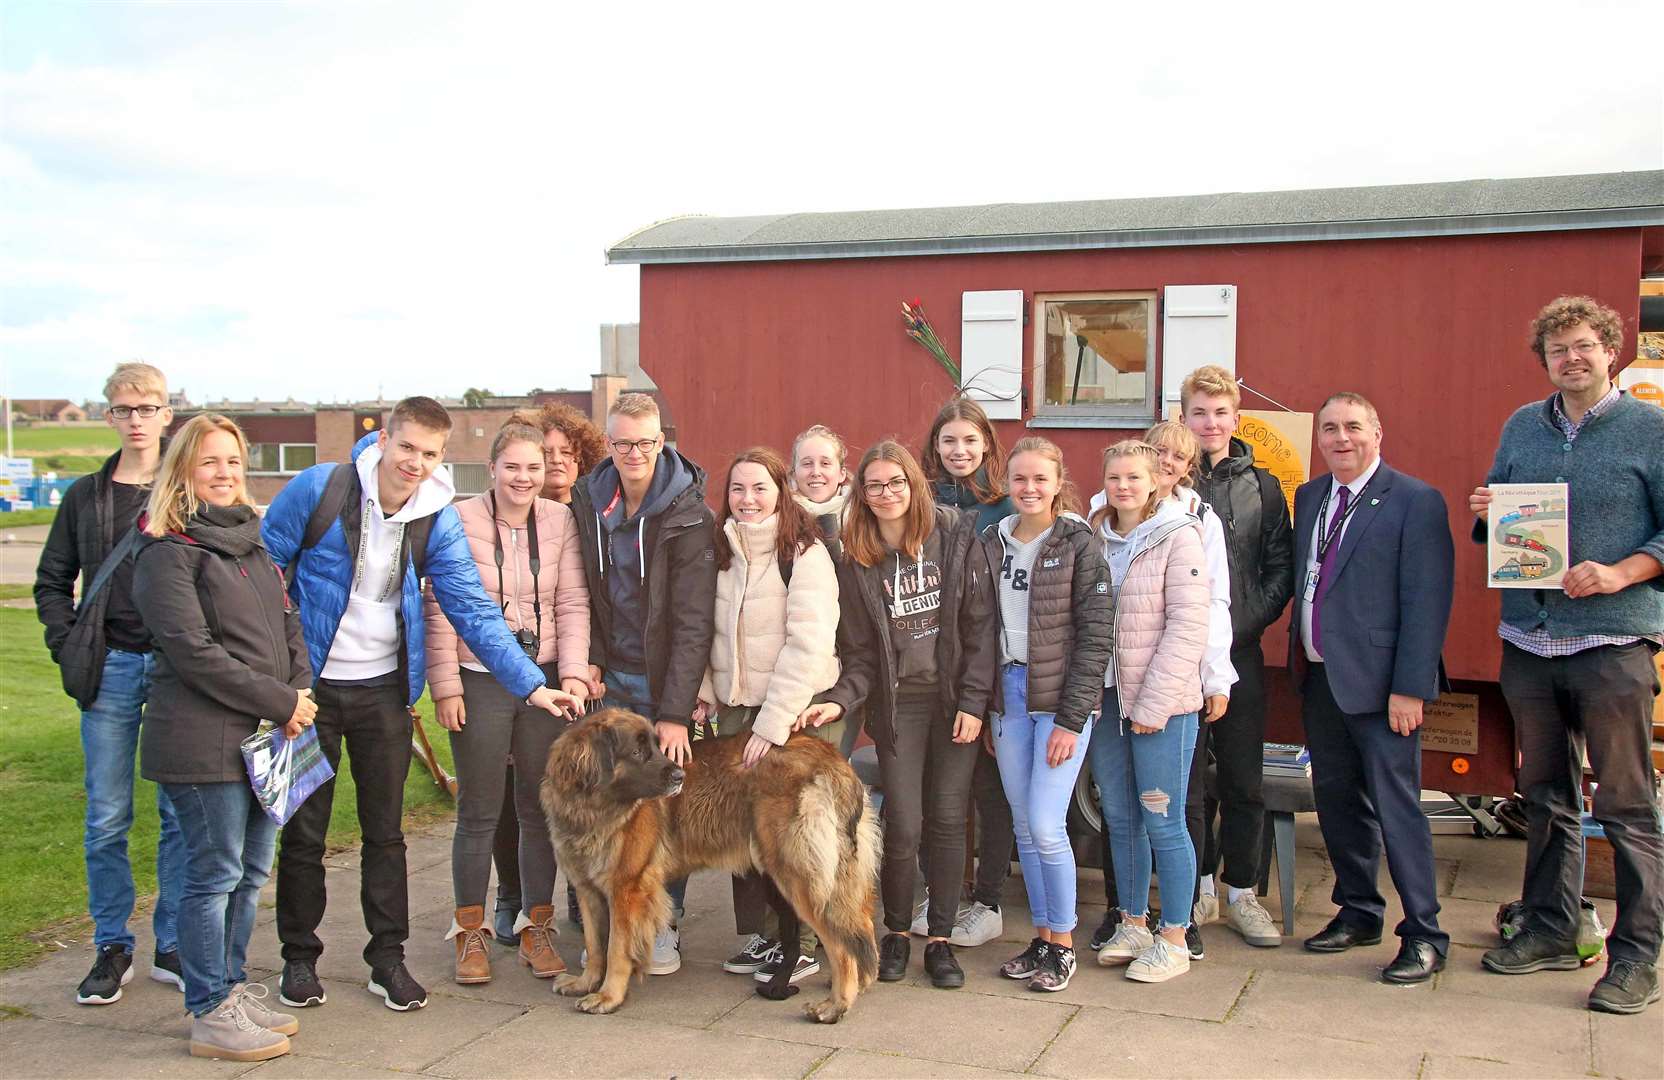 Pupils and staff from the Paul Pfinzing Gymnasium in Hersbruck outside the Welcome Hut at Lossiemouth High School, along with Councillor James Allan (second right) and PhD student Christian Hanser. Picture: P Bloomfield.